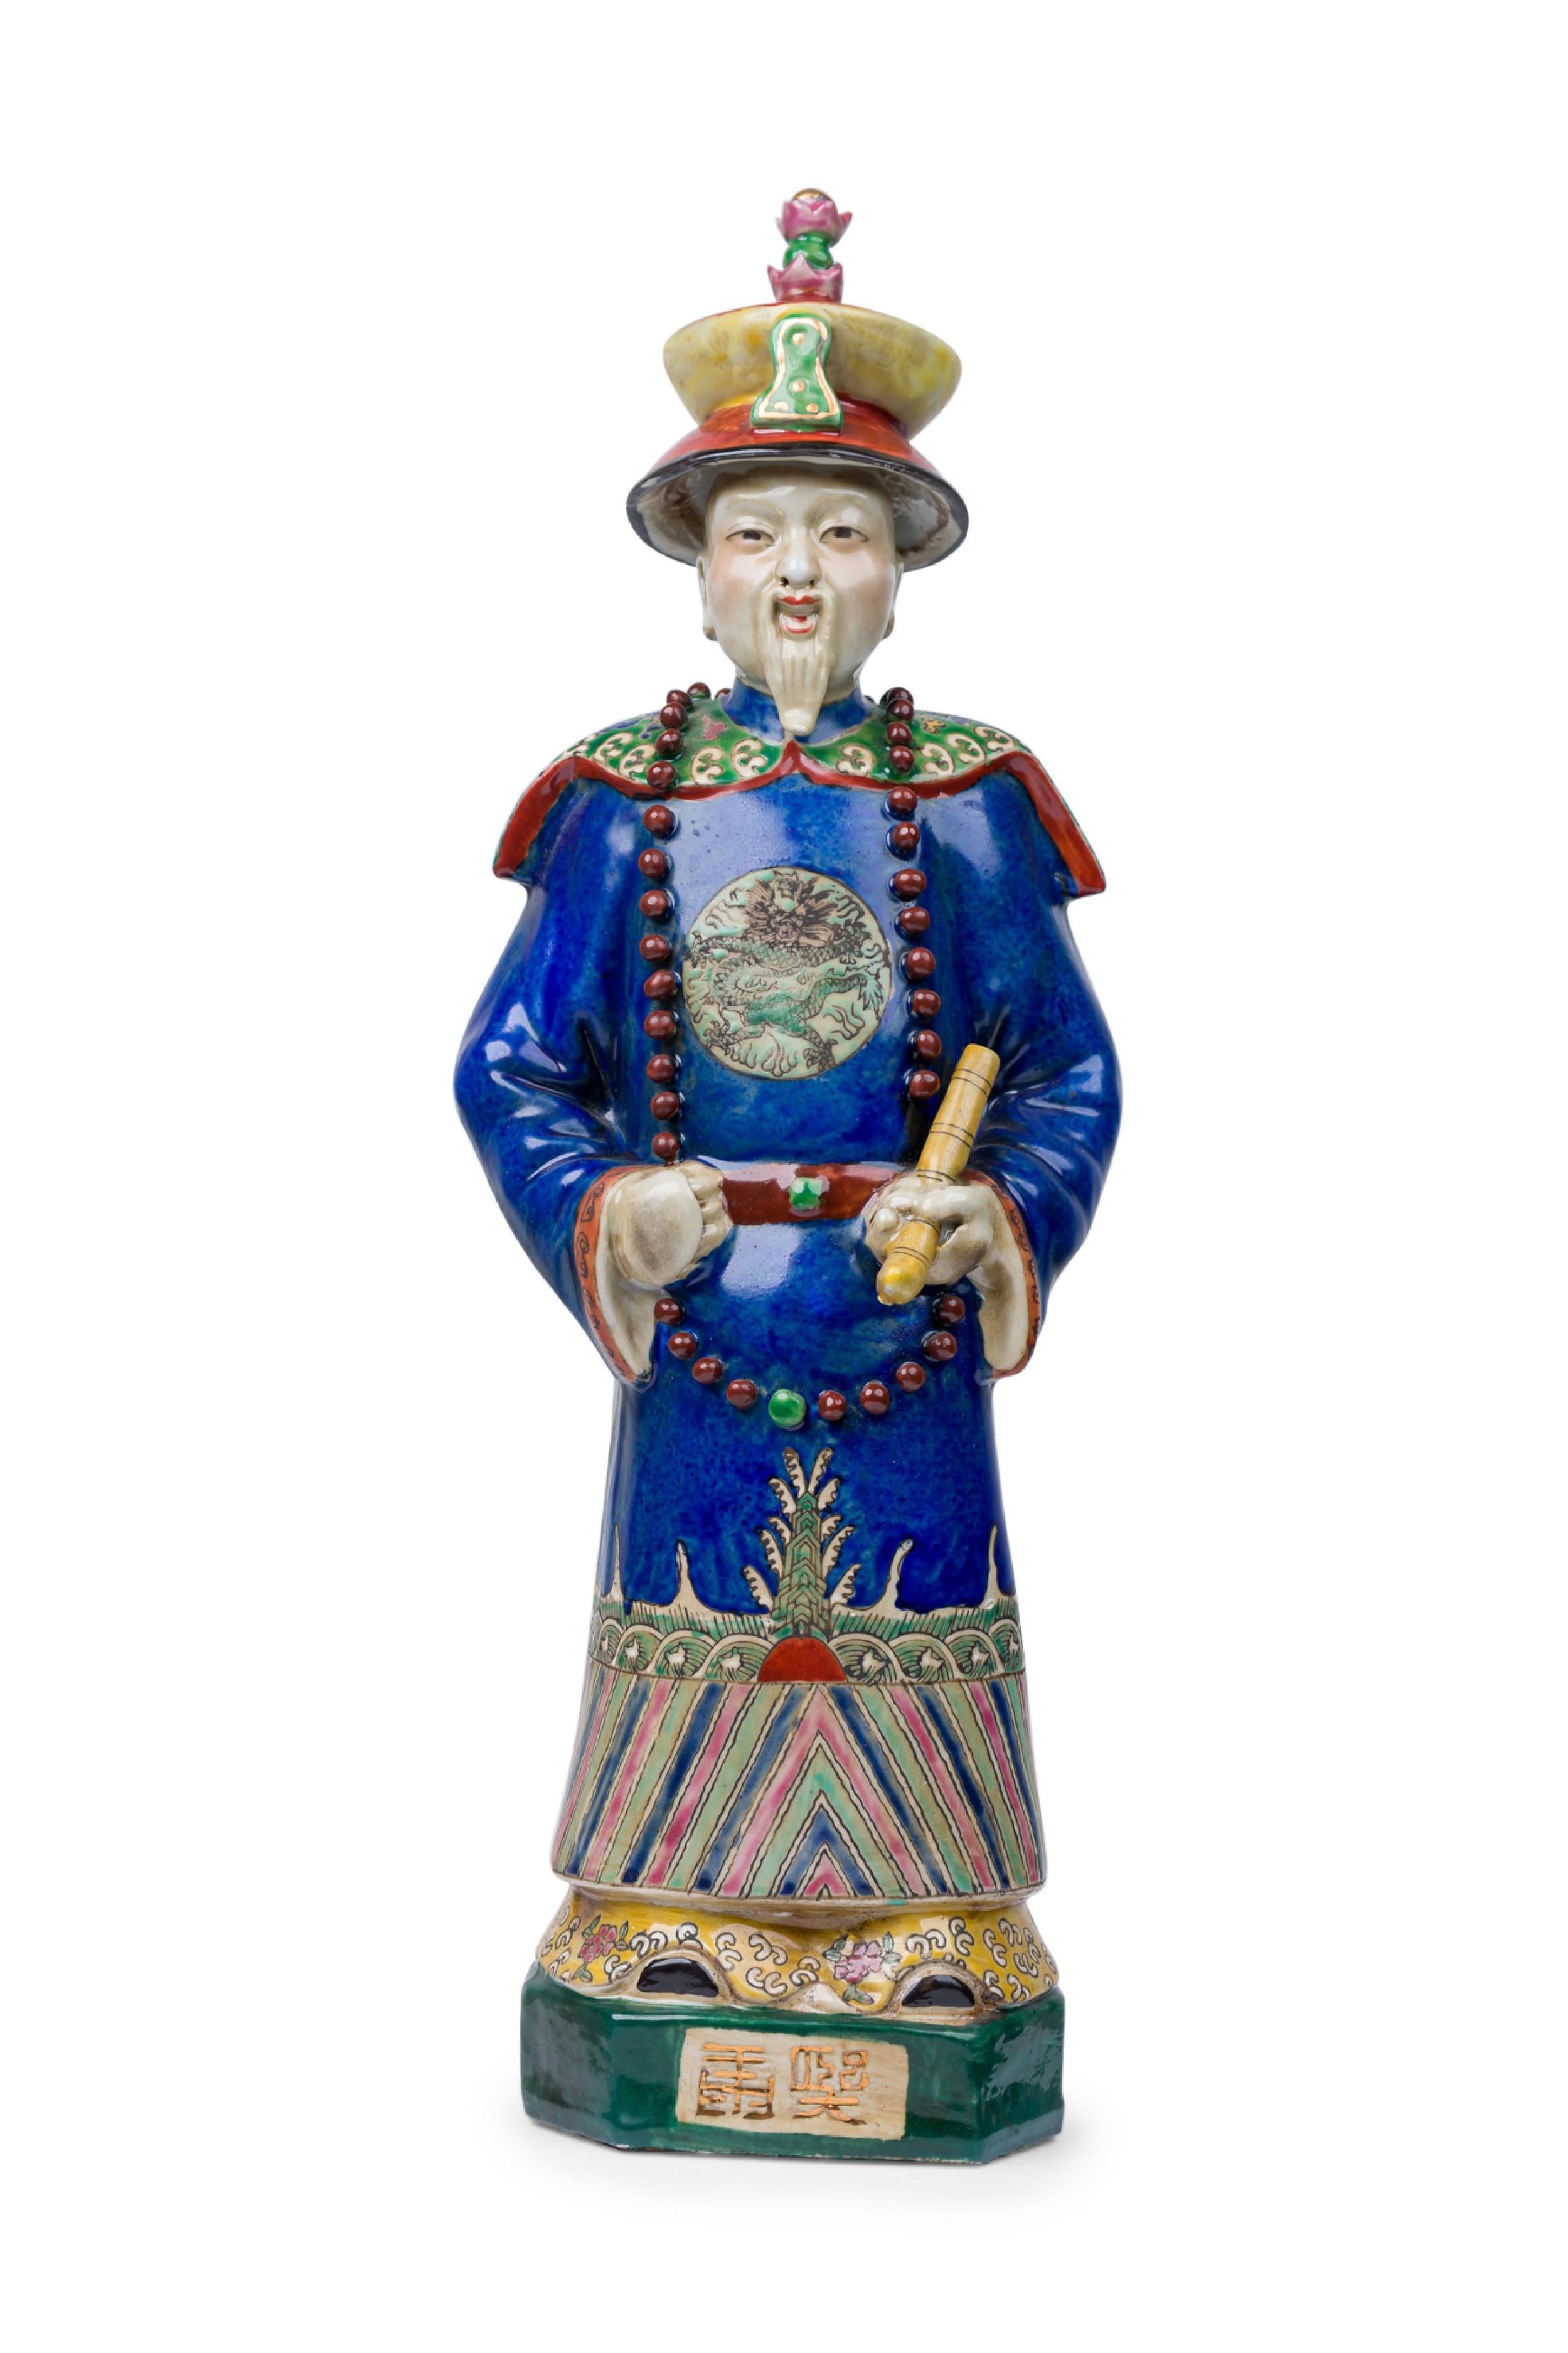 Pair of Chinese Painted Ceramic Figures Depicting a Blue Robed Emperor For Sale 15